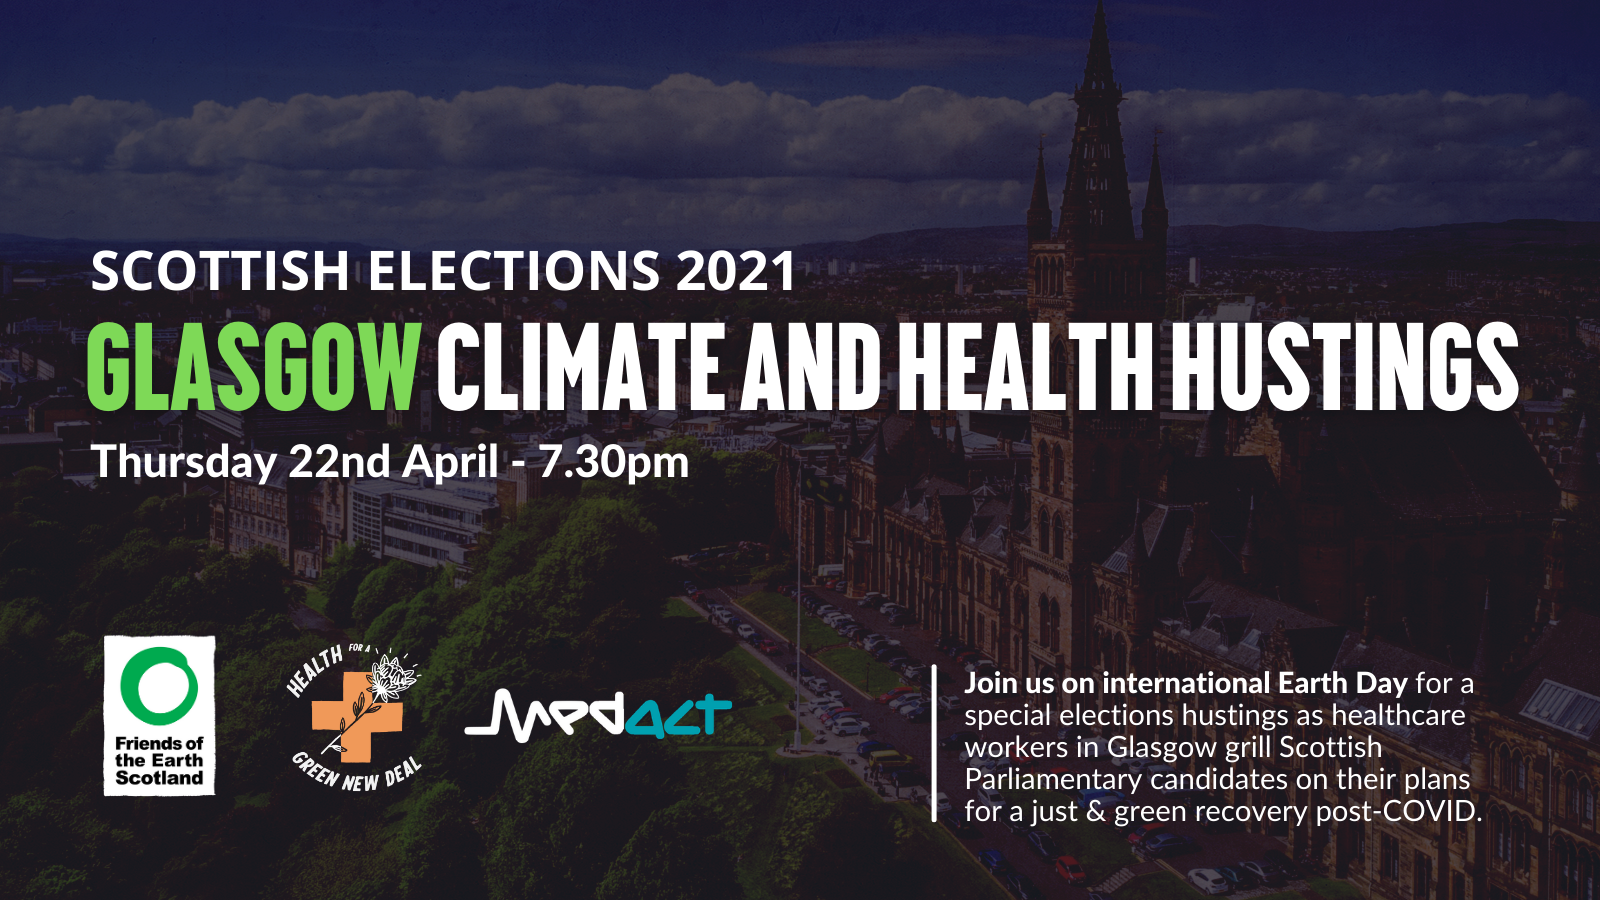 Event title and key details over faded image of Glasgow: Scottish Election 2021 Glasgow Climate and Health Hustings Thursday 22nd April, 7.30pm, organised by Friends of the Earth Scotland / Health for a Green New Deal / Medact